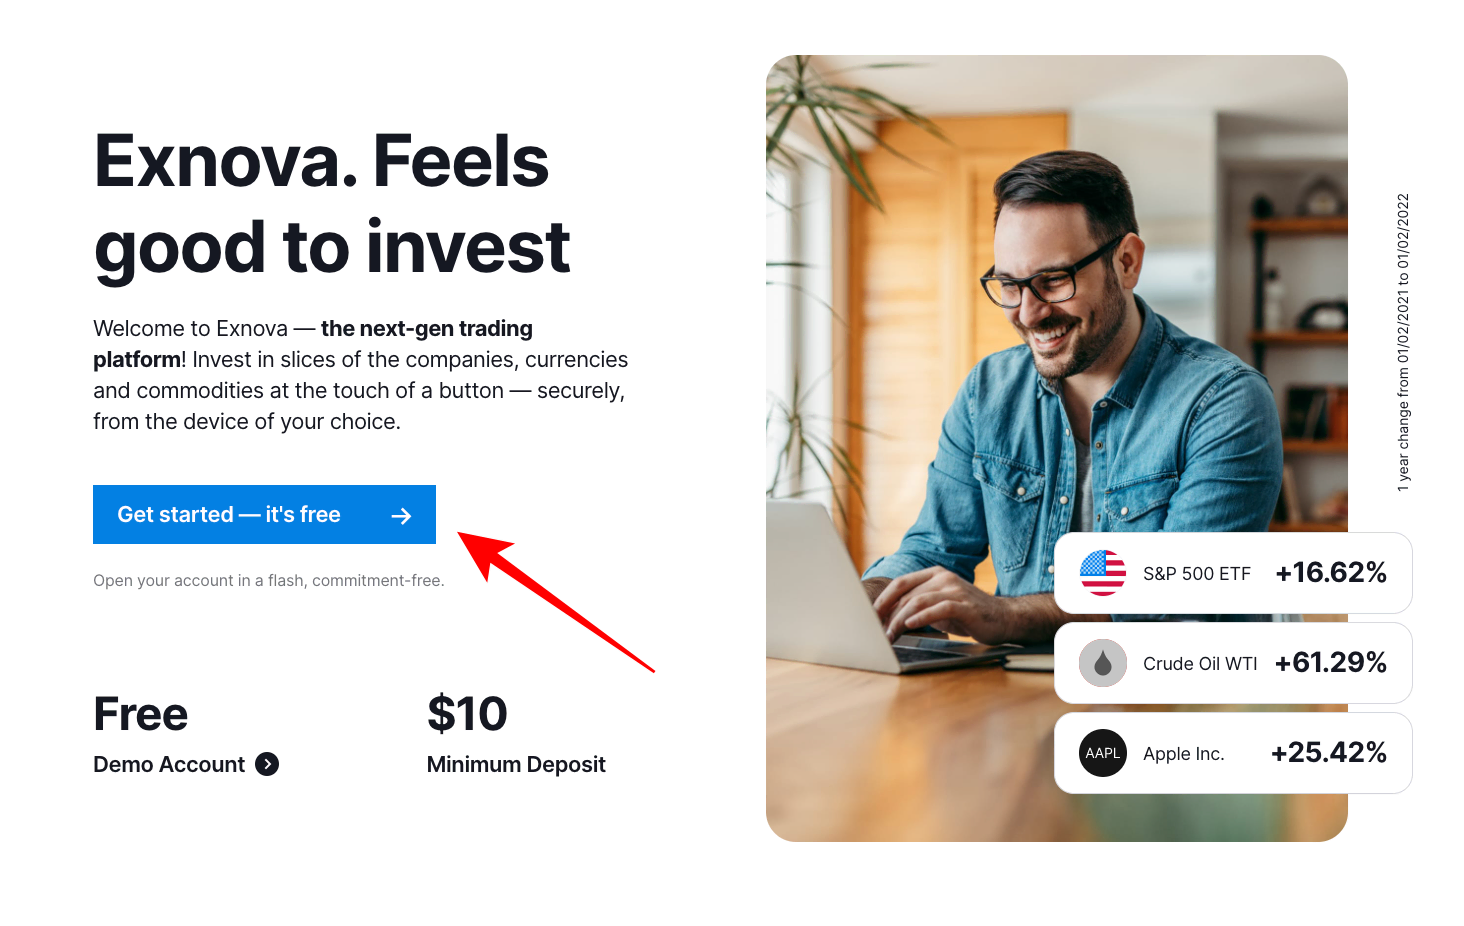 How to open a trading account on Exnova